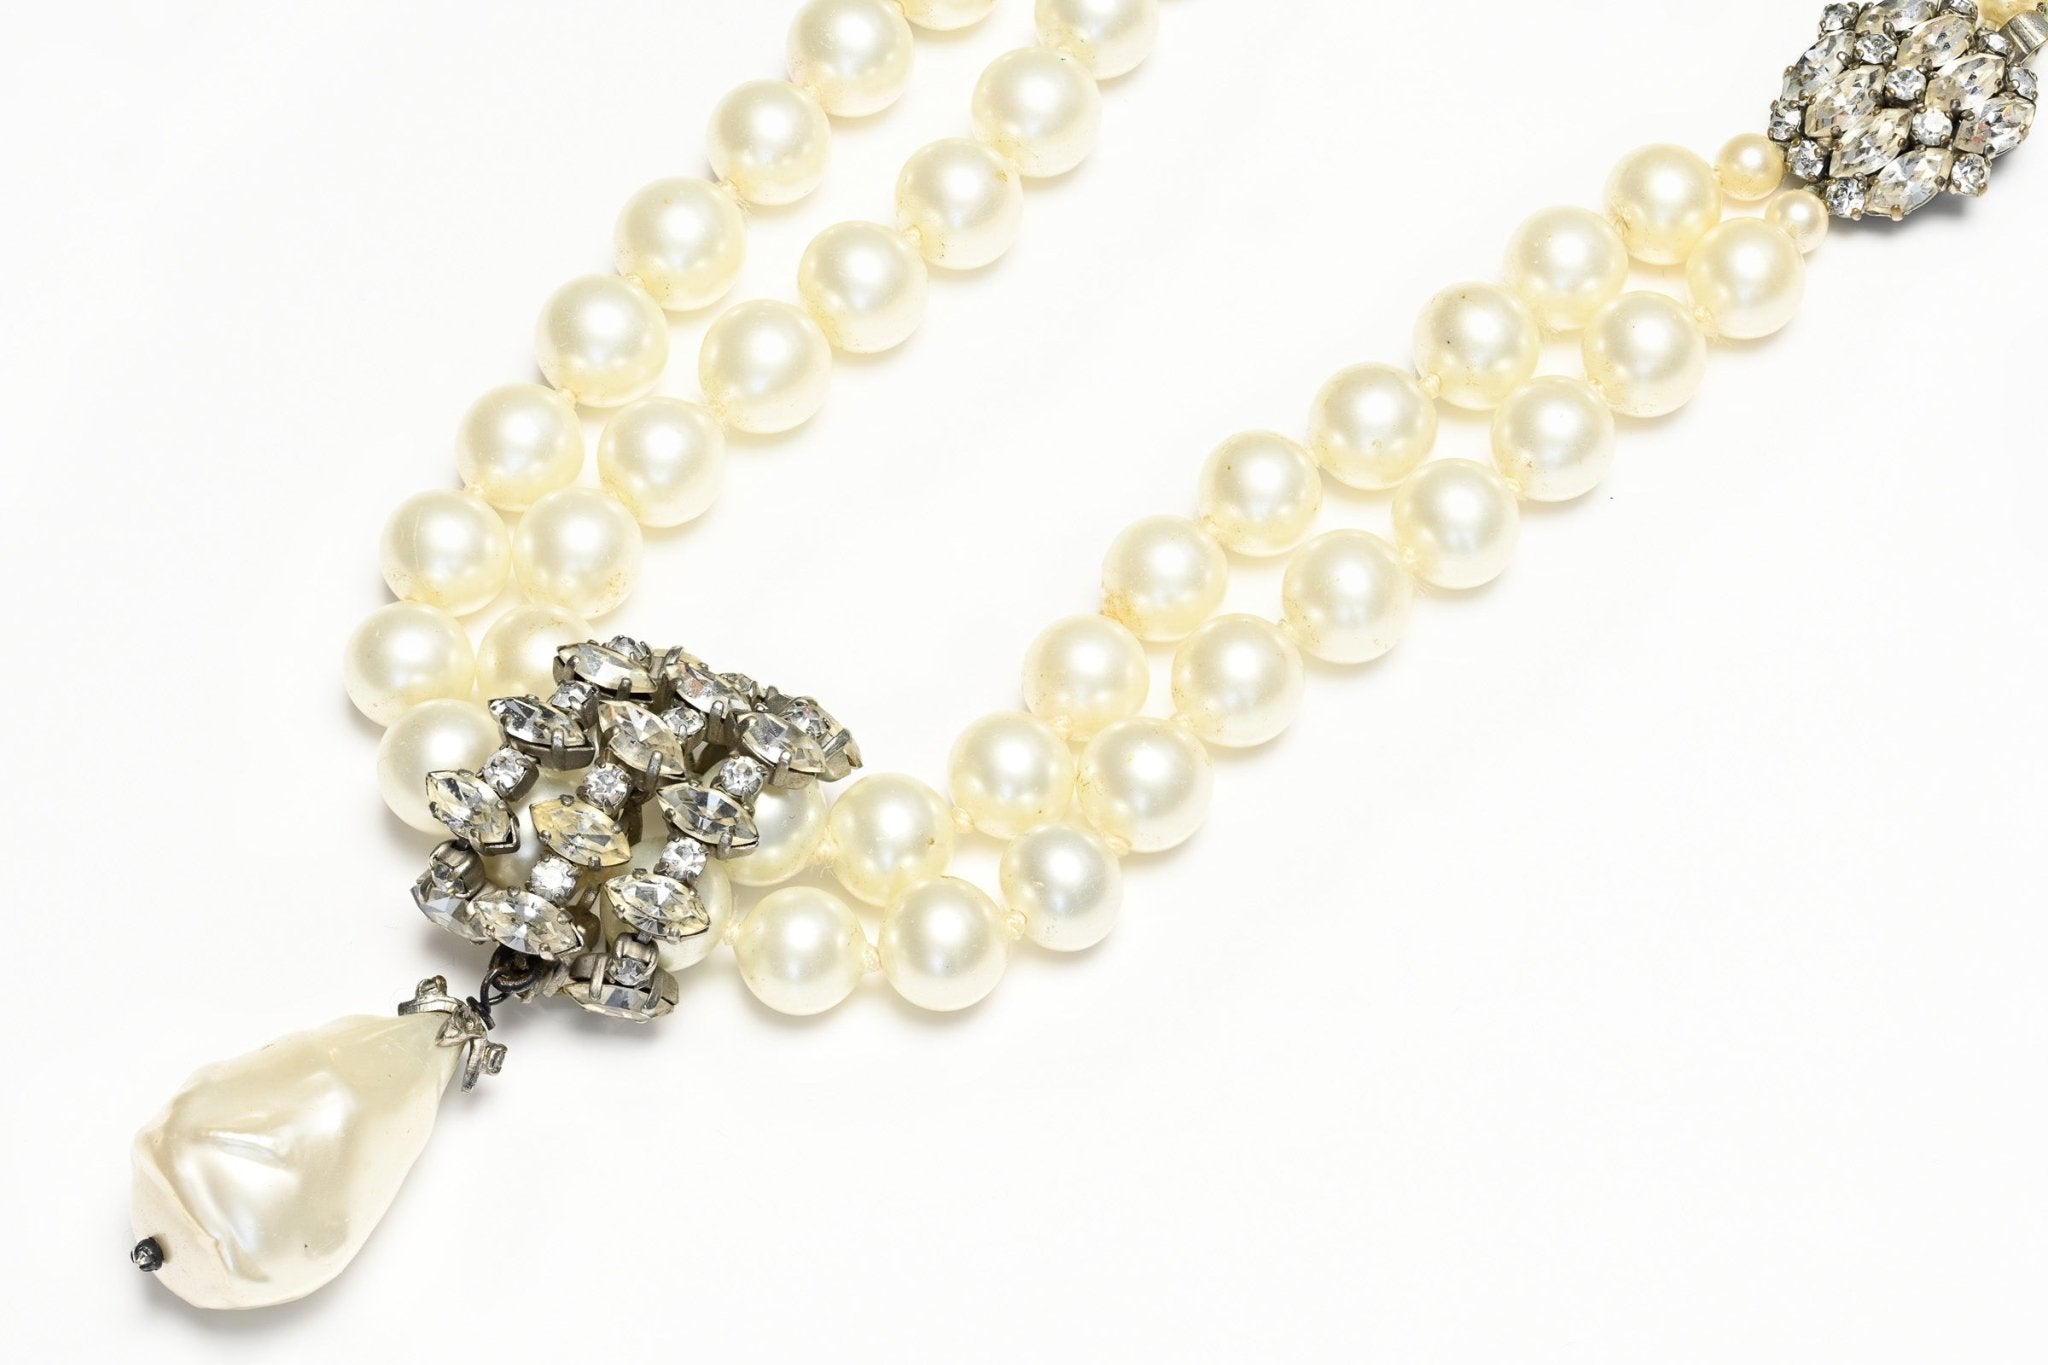 Vintage 1950's Christian Dior Paris Couture Roger Jean-Pierre Pearl Crystal Necklace